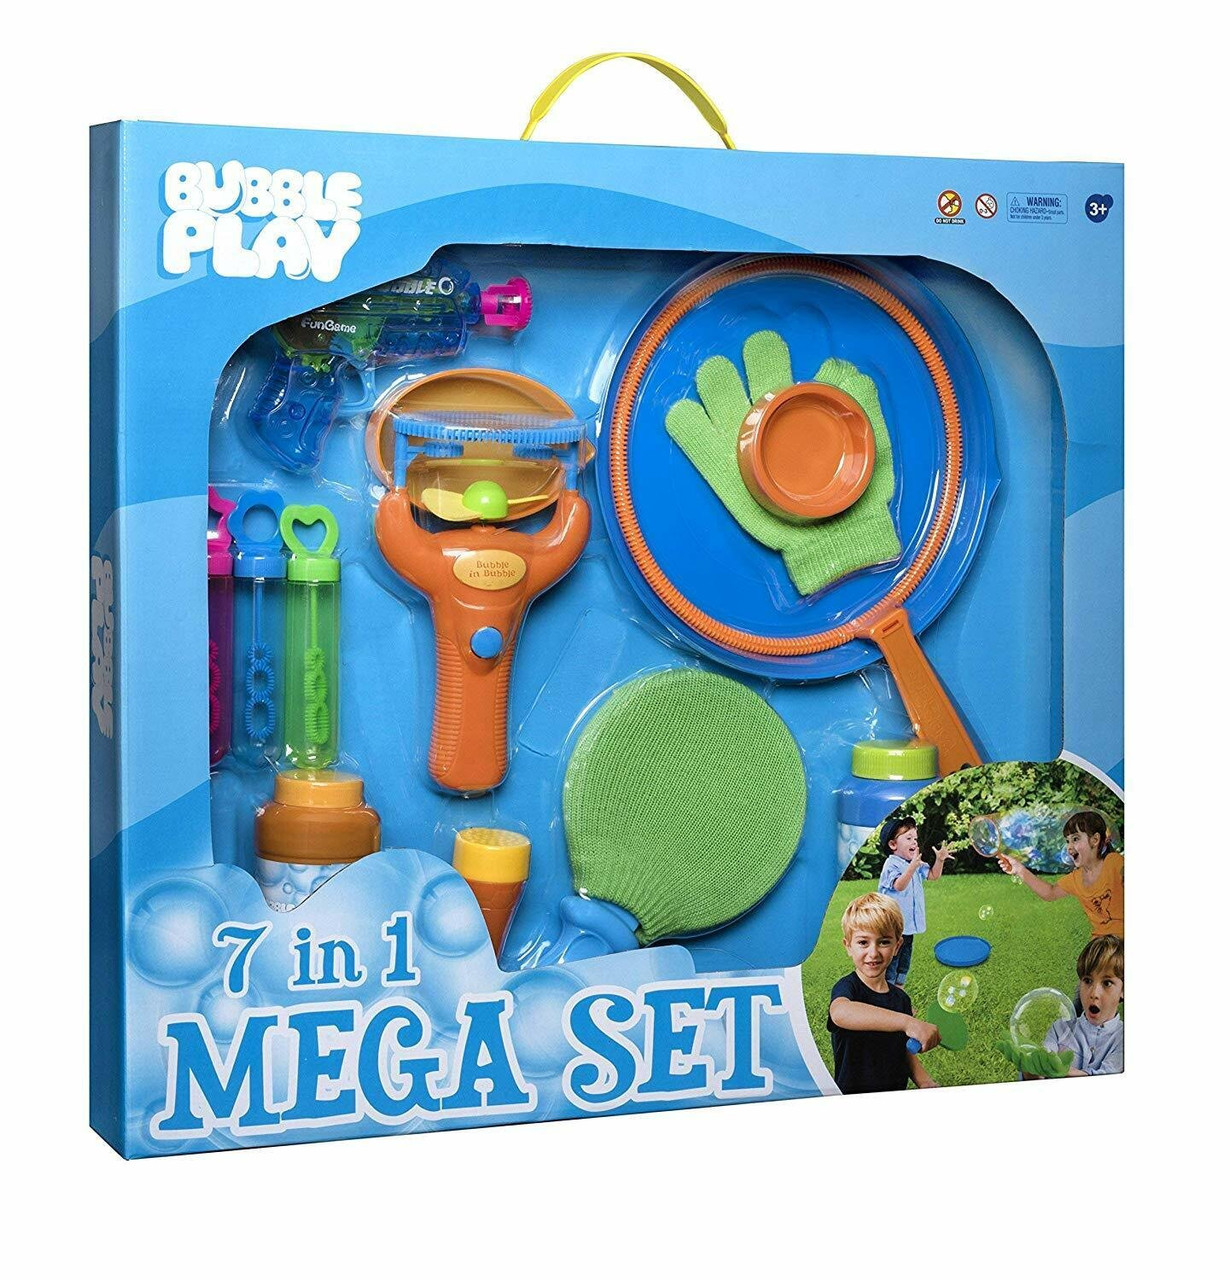 Bubble Play 7-in-1 Magic Bouncing Bubble Mega Set Includes [3] Mini  Blowers, [2] 8oz Solution Refills, Blaster Gun, Handheld Fan, Jumbo Wand,  Bouncy Game Paddle, Glove, Blower Tool, Trays & More - Toys 4 U